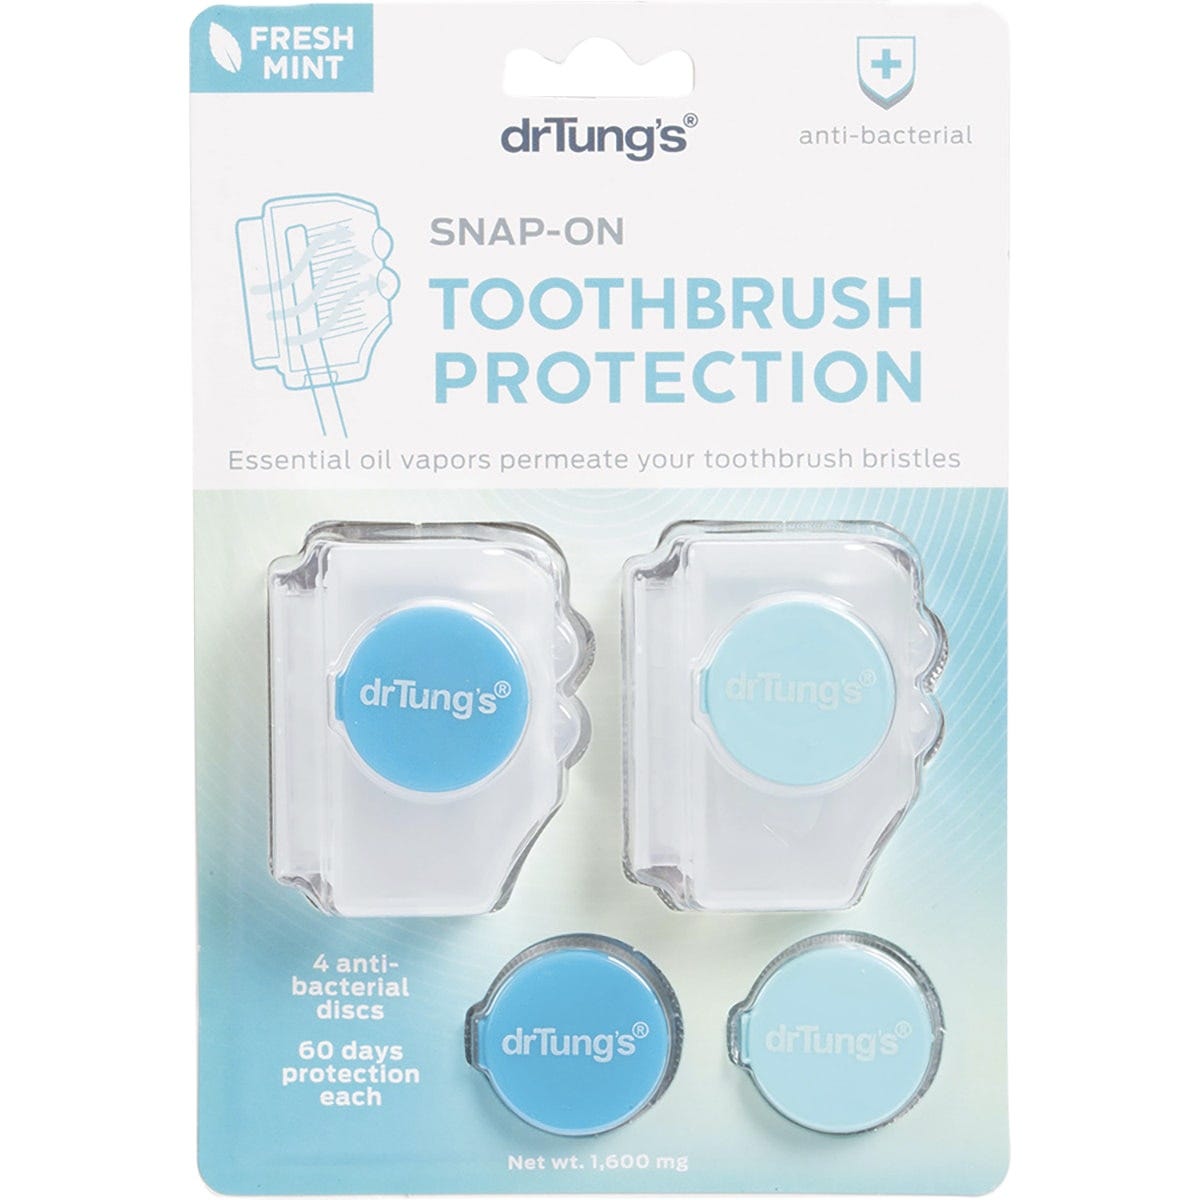 Dr Tung's Toothbrush Protection with 2 Refills (Colour May Vary)